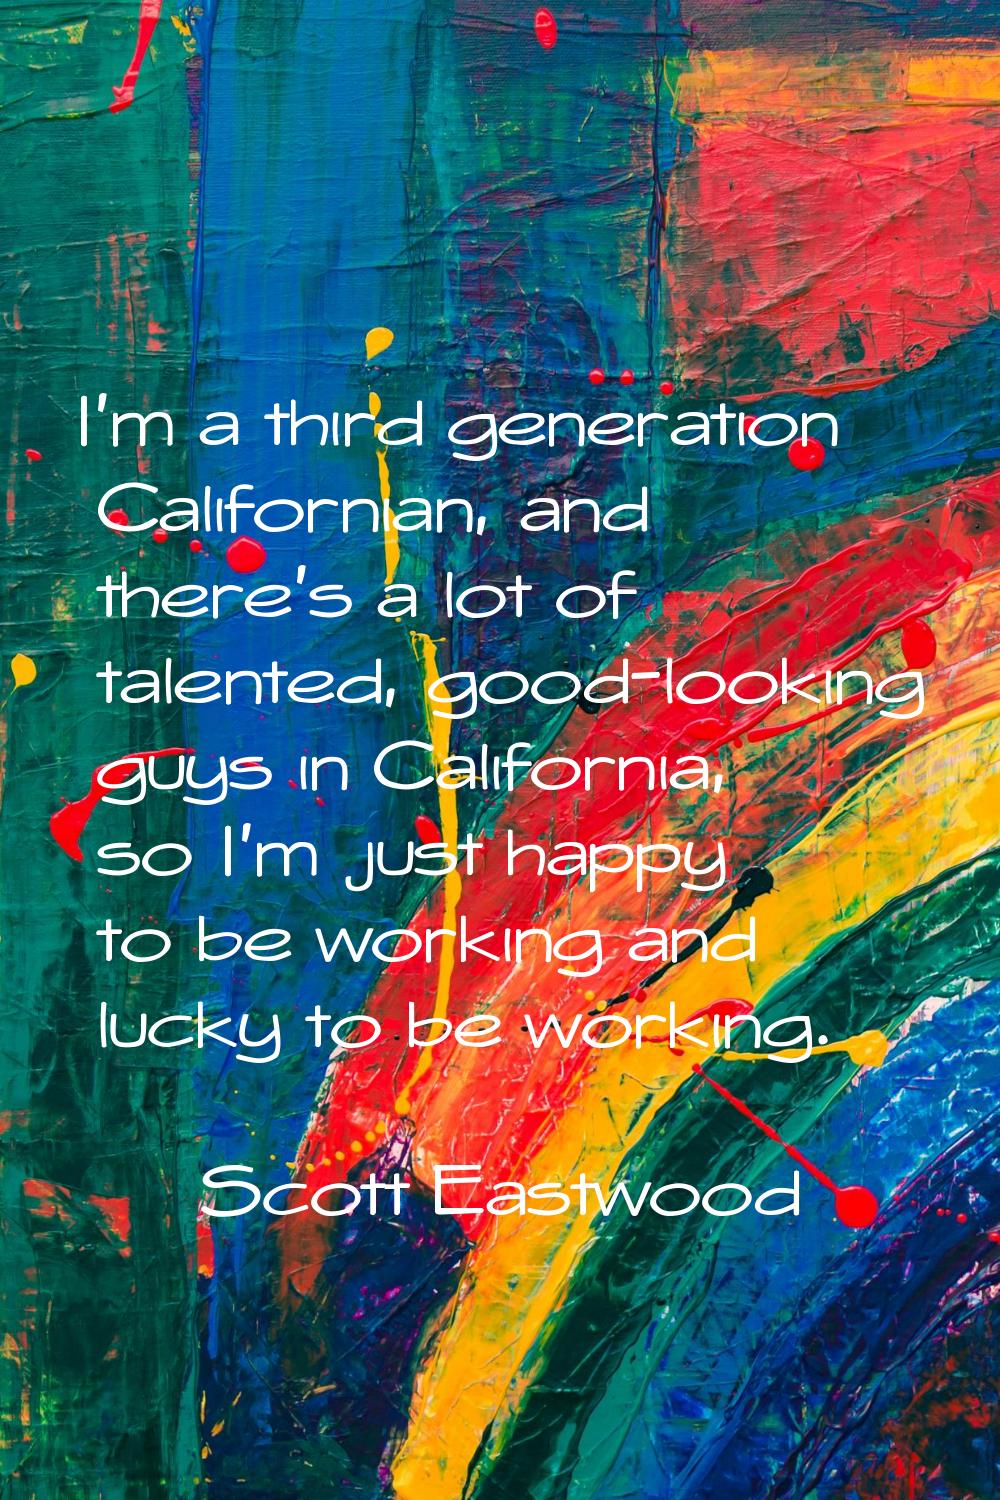 I'm a third generation Californian, and there's a lot of talented, good-looking guys in California,